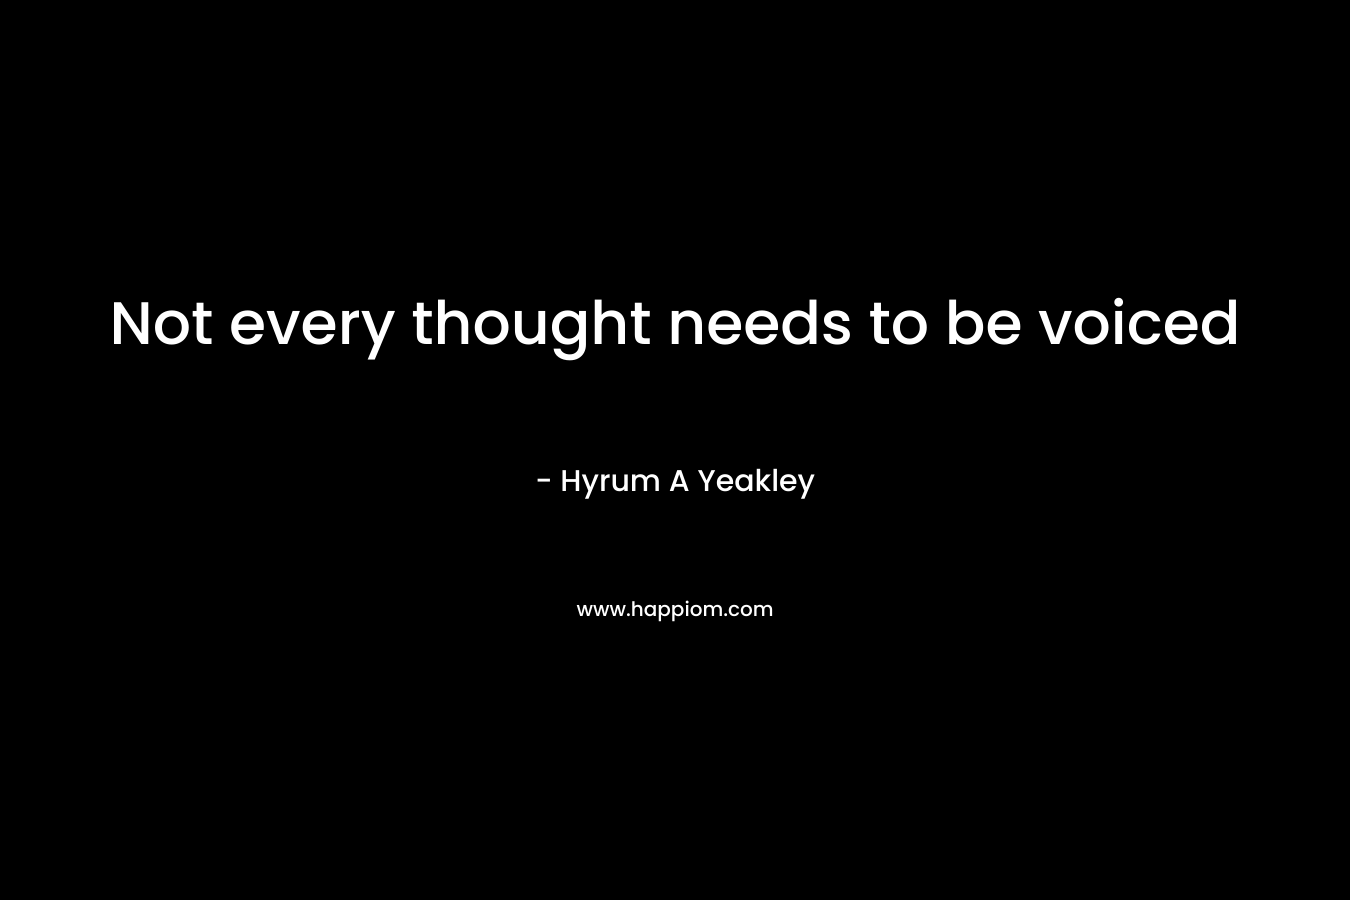 Not every thought needs to be voiced